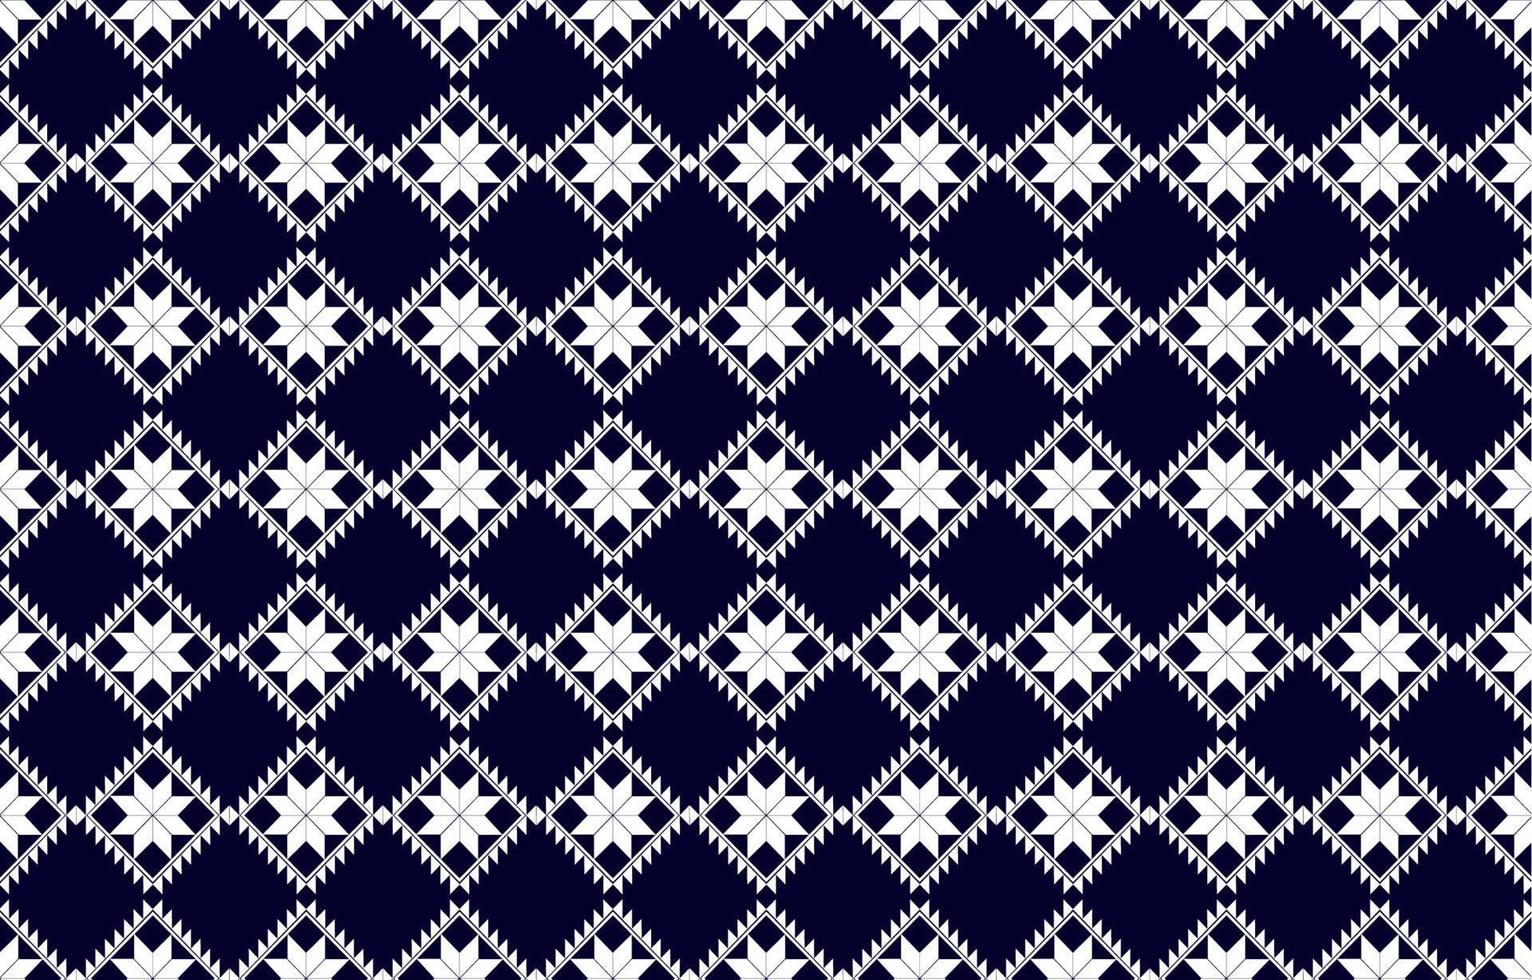 Geometric ethnic pattern fabric traditional style. black and white tone. Design for tile, ceramic, background, wallpaper, clothing, wrapping paper, fabric, and Vector illustration. pattern style